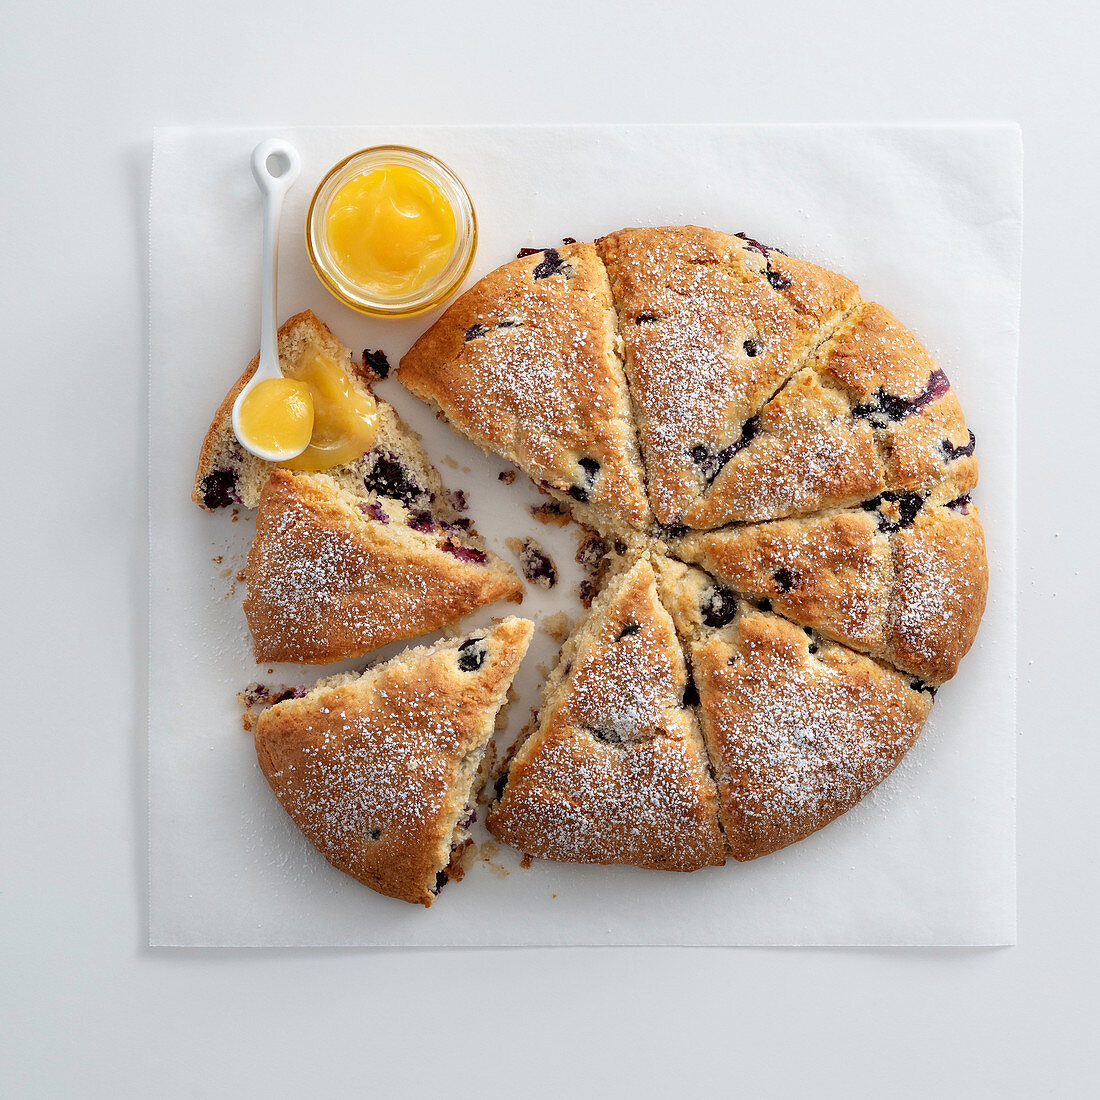 A fruit scone cake with coconut and blueberries